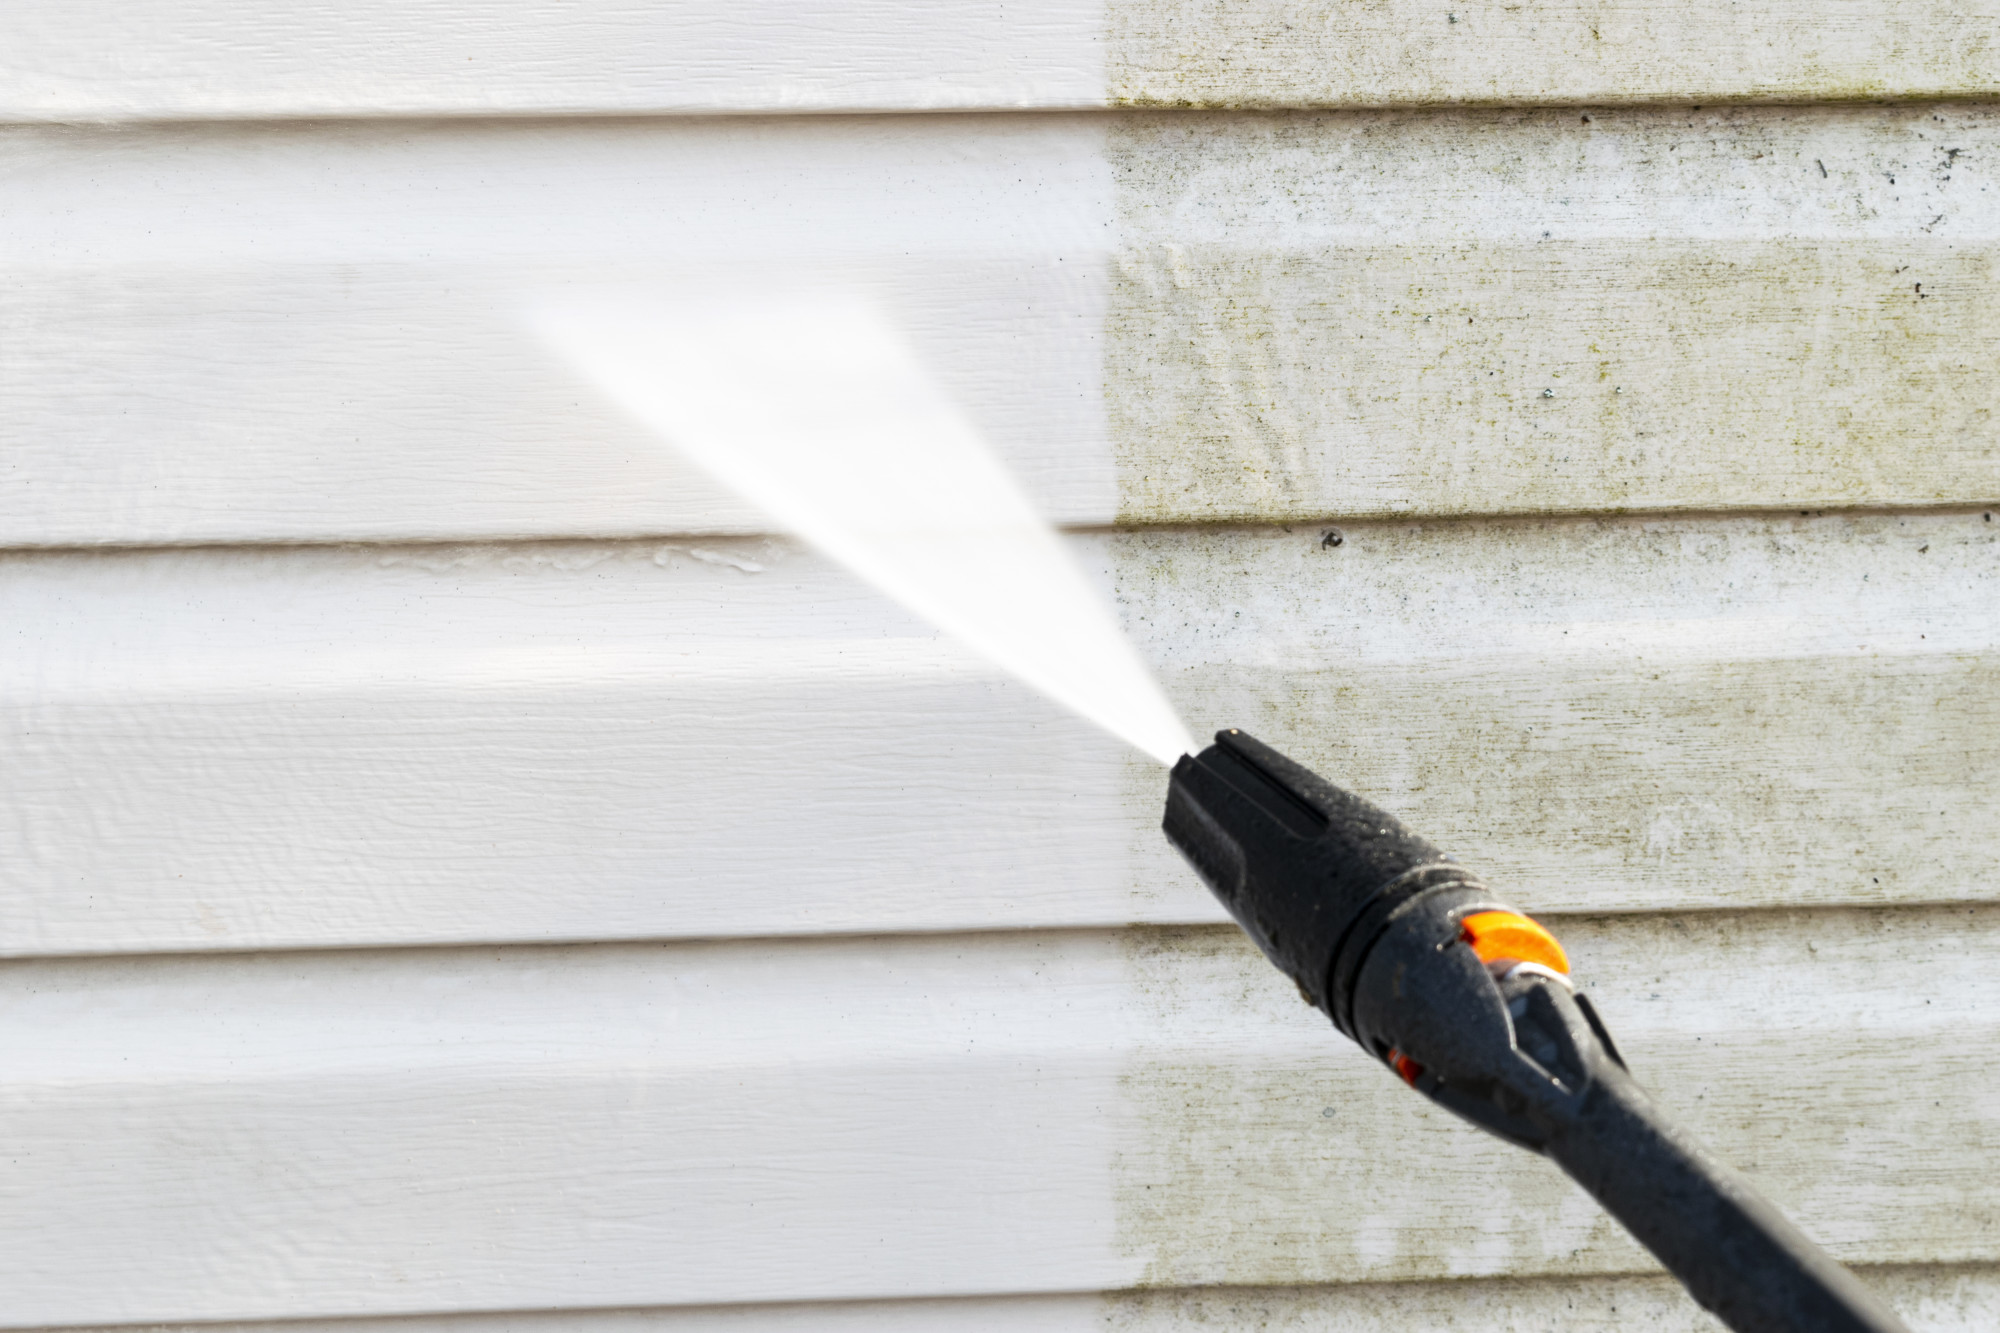 When you want the exterior of your home to look clean and new again, click here to explore the benefits of professional power washing.